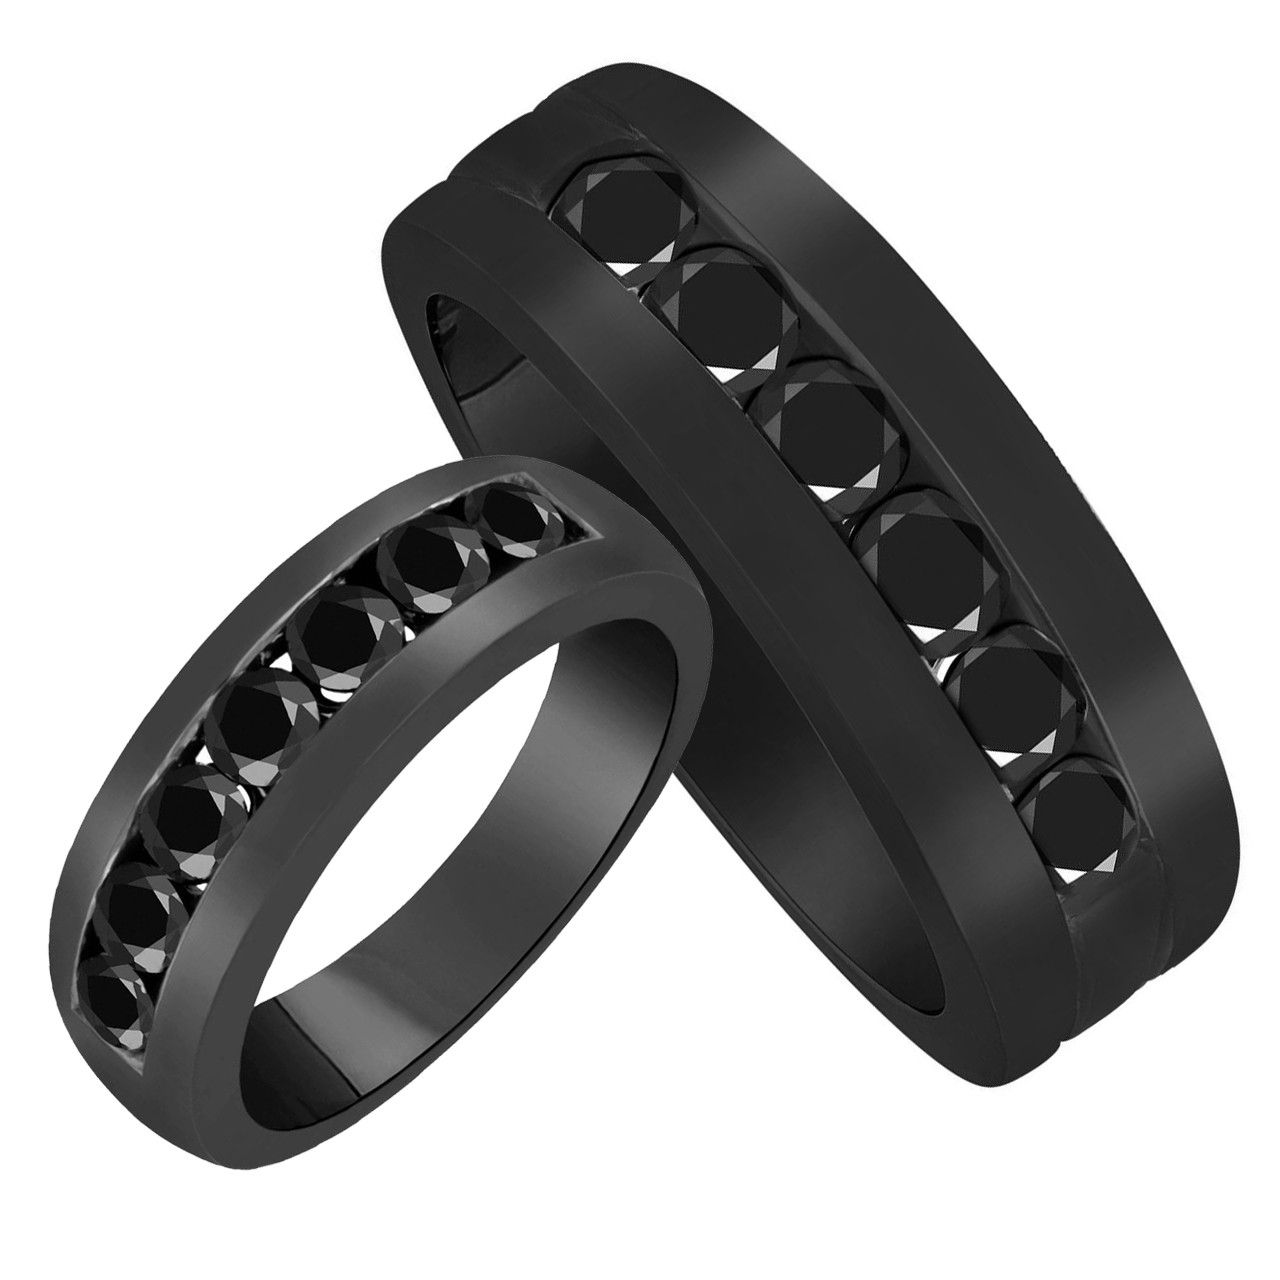 Unique Wedding Band Sets His And Hers
 3 Carat His and Hers Wedding Bands Unique Black Diamond